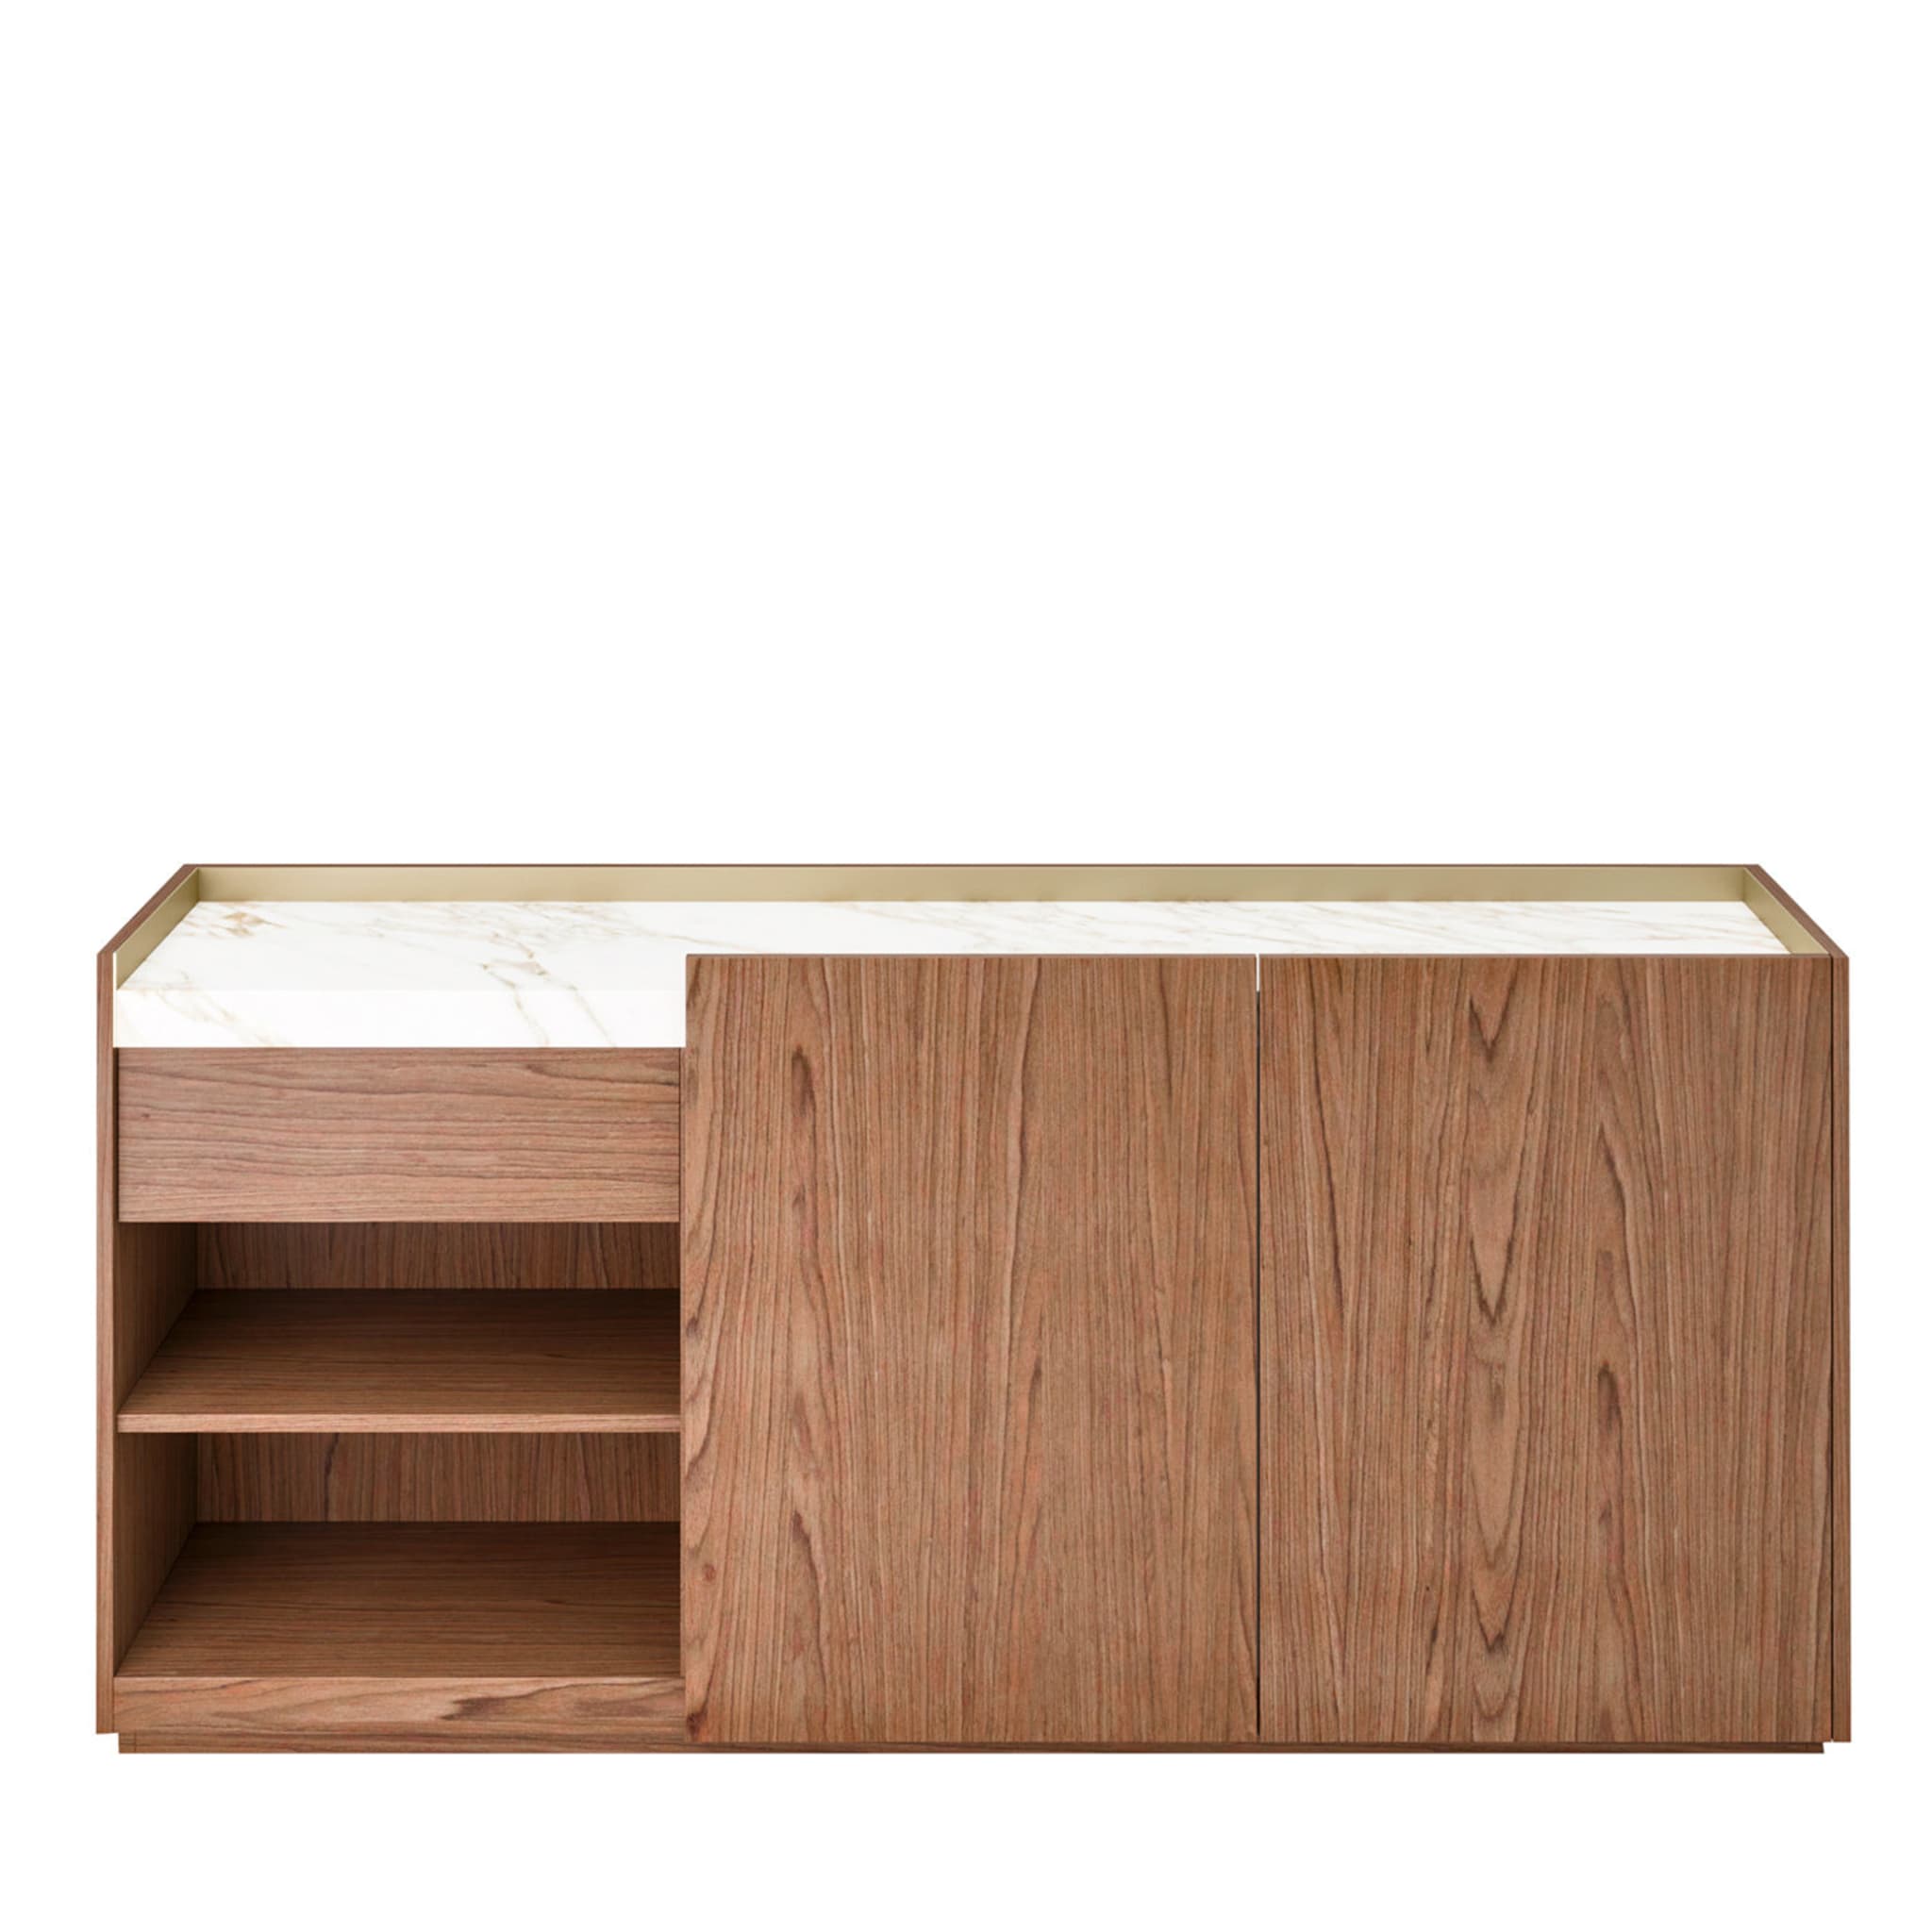 Block 2.0 Sideboard in Walnut with Carrara Marble Top - Main view